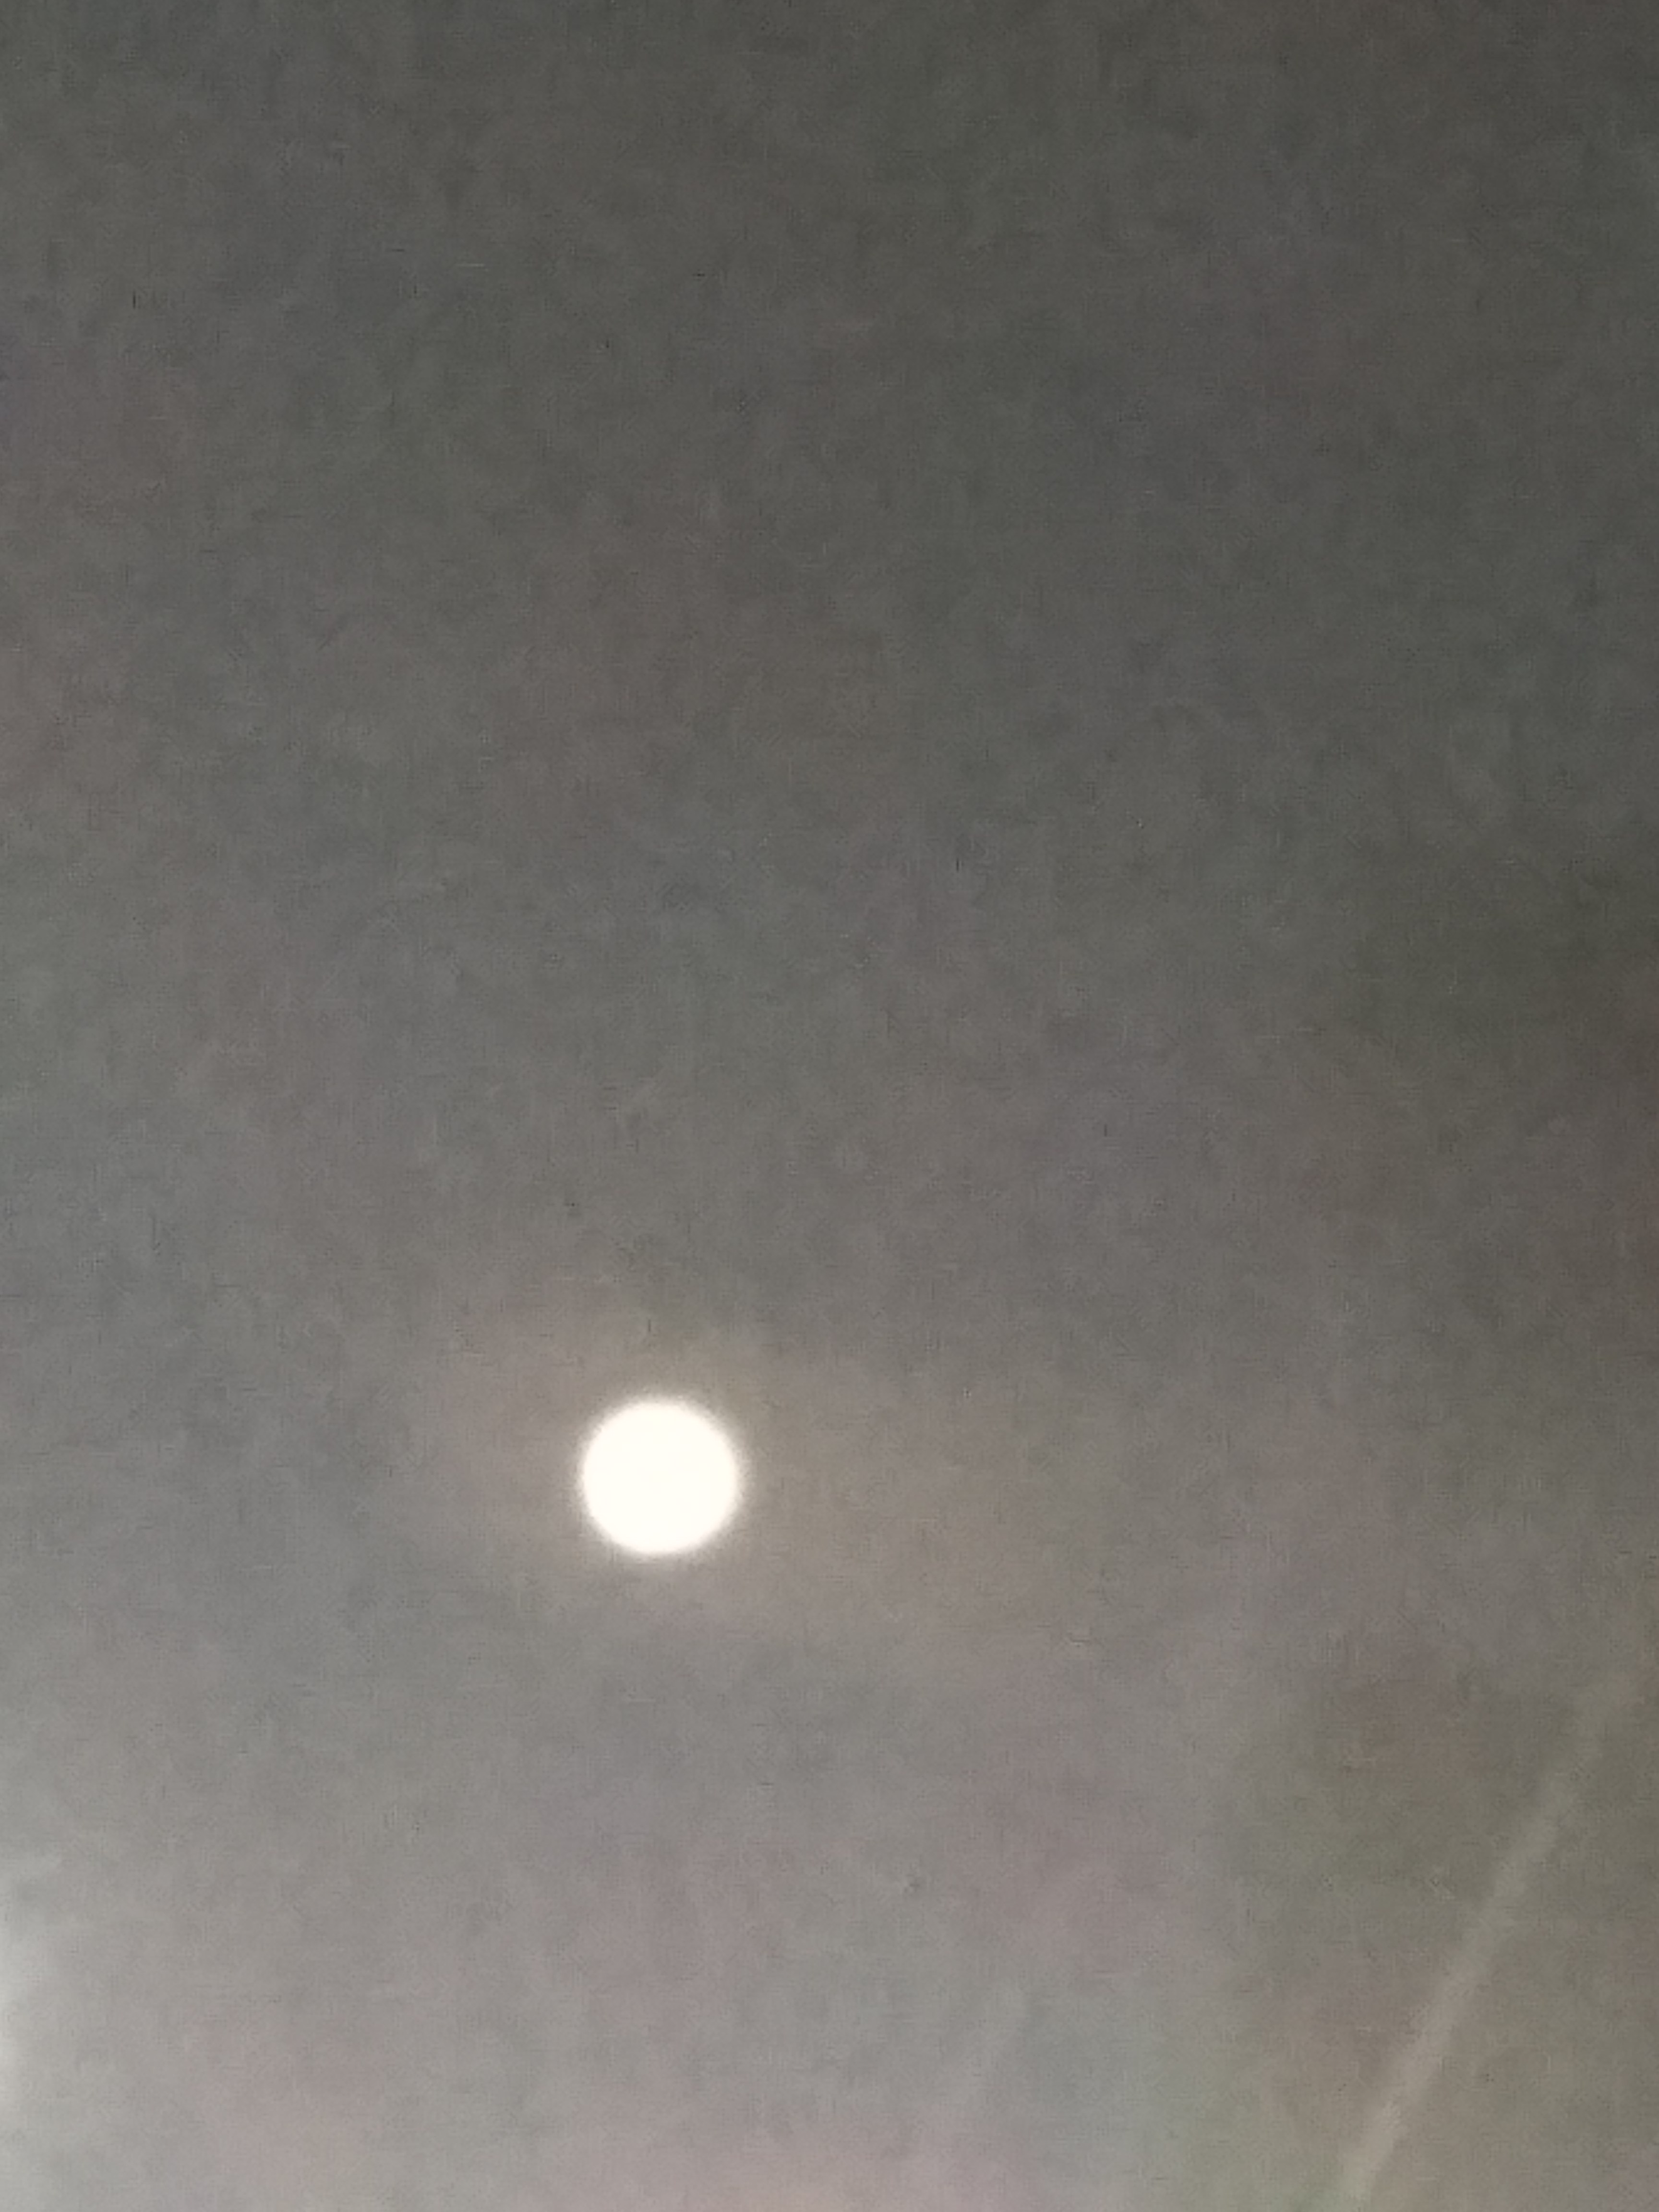 Full Moon Image - Clicked By Self